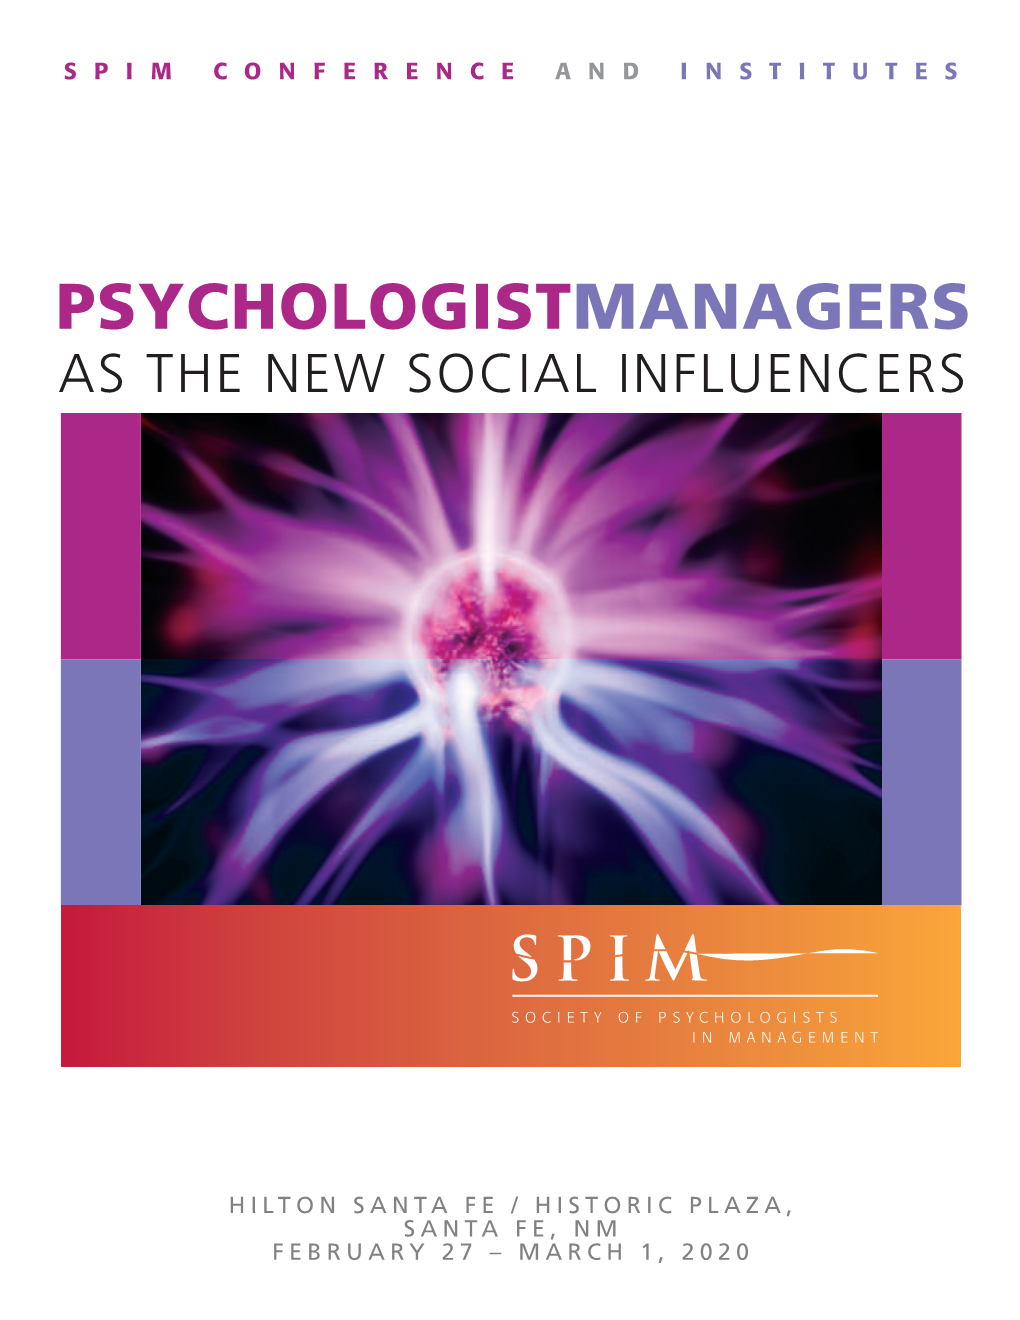 Psychologistmanagers As the New Social Influencers